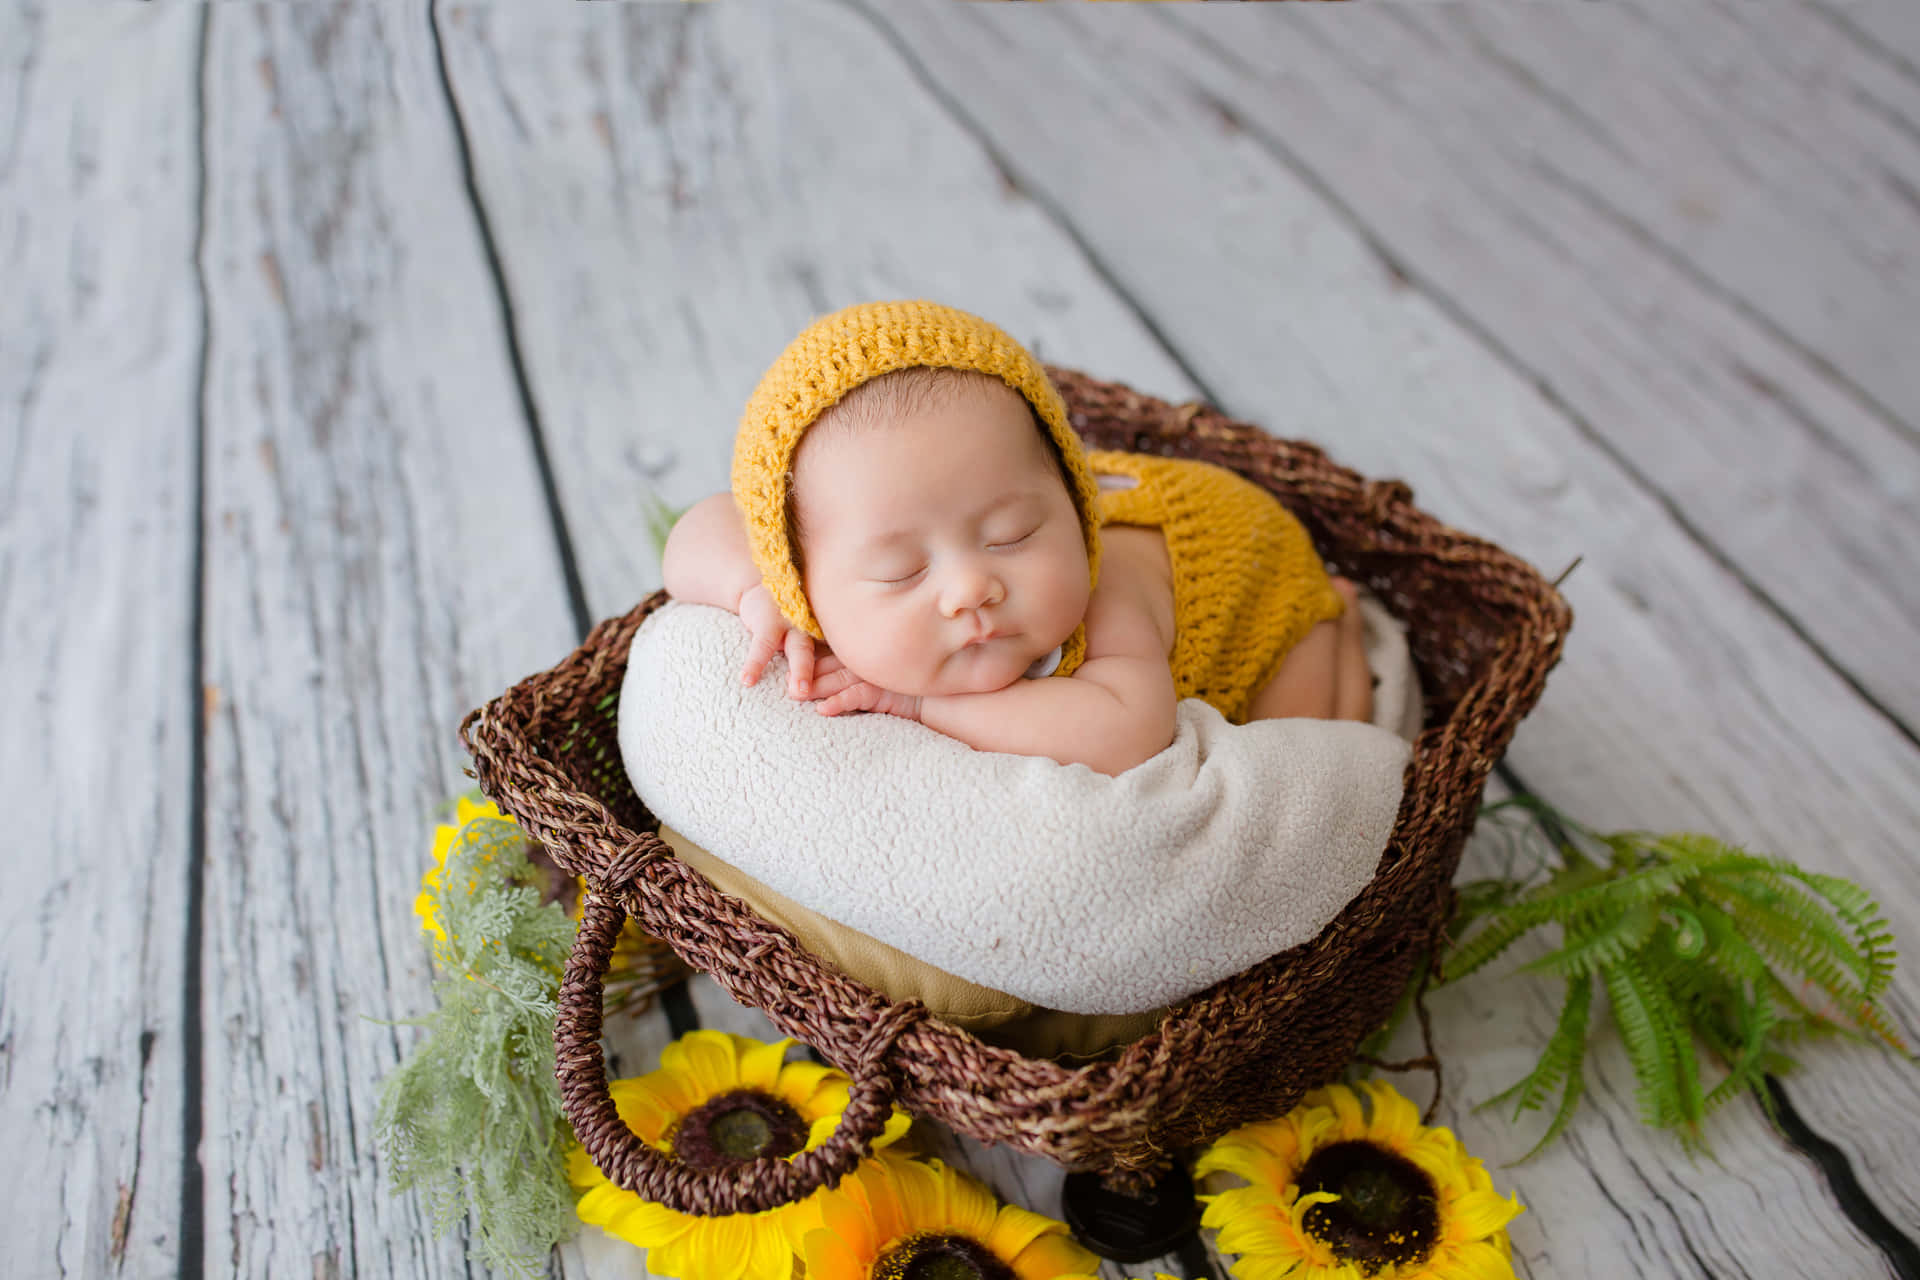 a baby sleeping in a basket with sunflowers